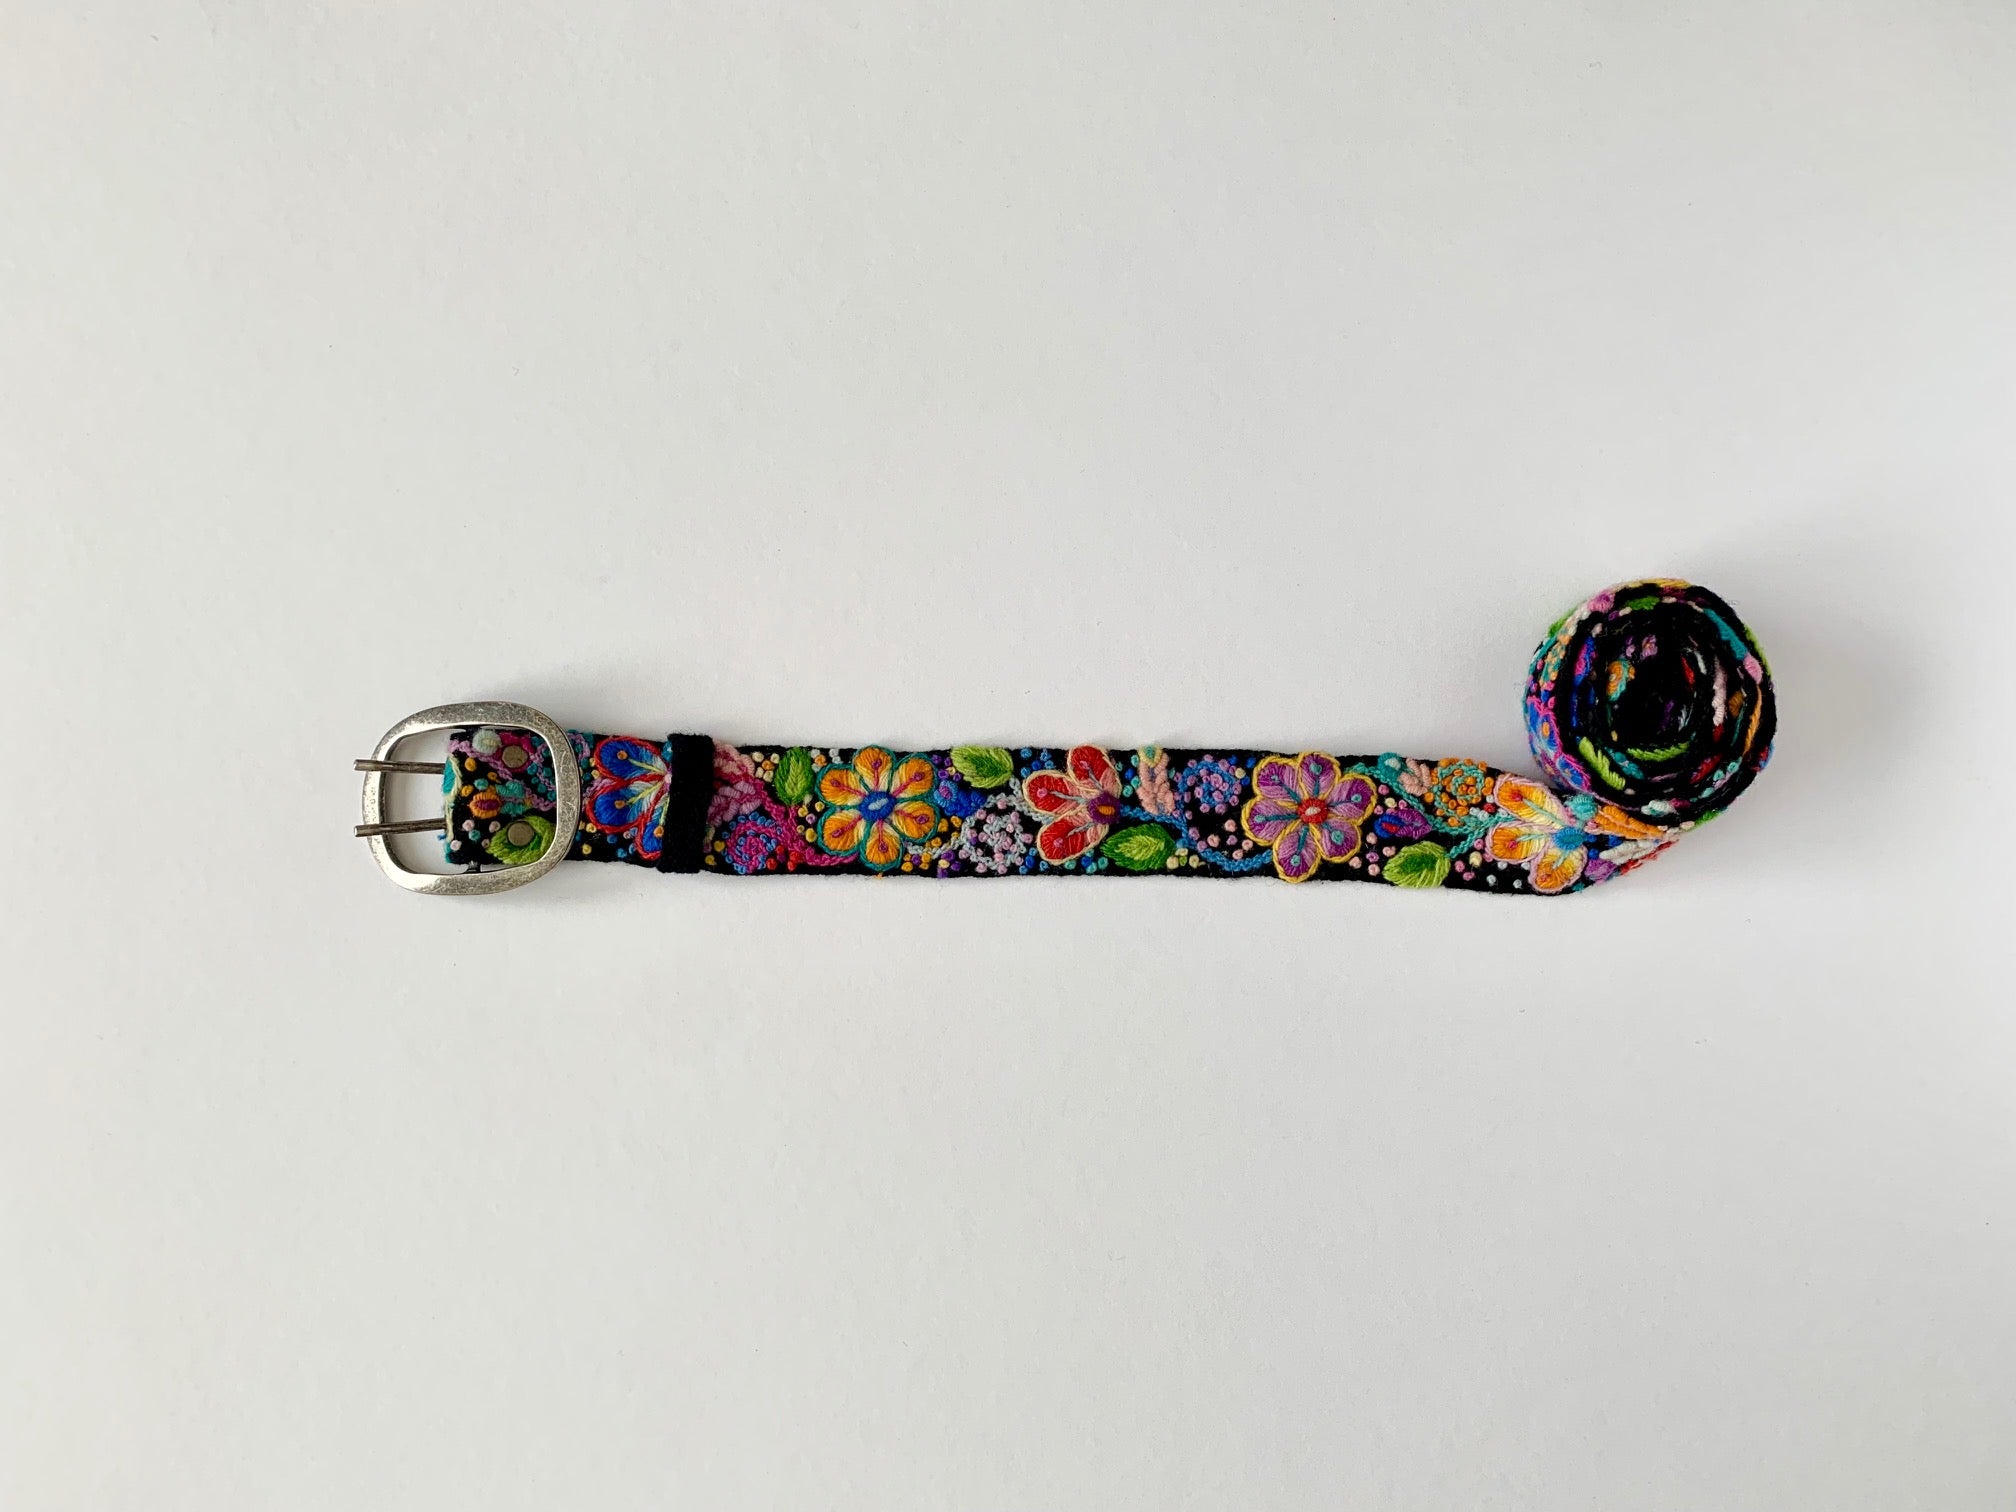 Black Floral Belt with colorful flower embroidery and metal buckle, hand loomed wool fabric from Peru. Sizes: S, M, L, XL.